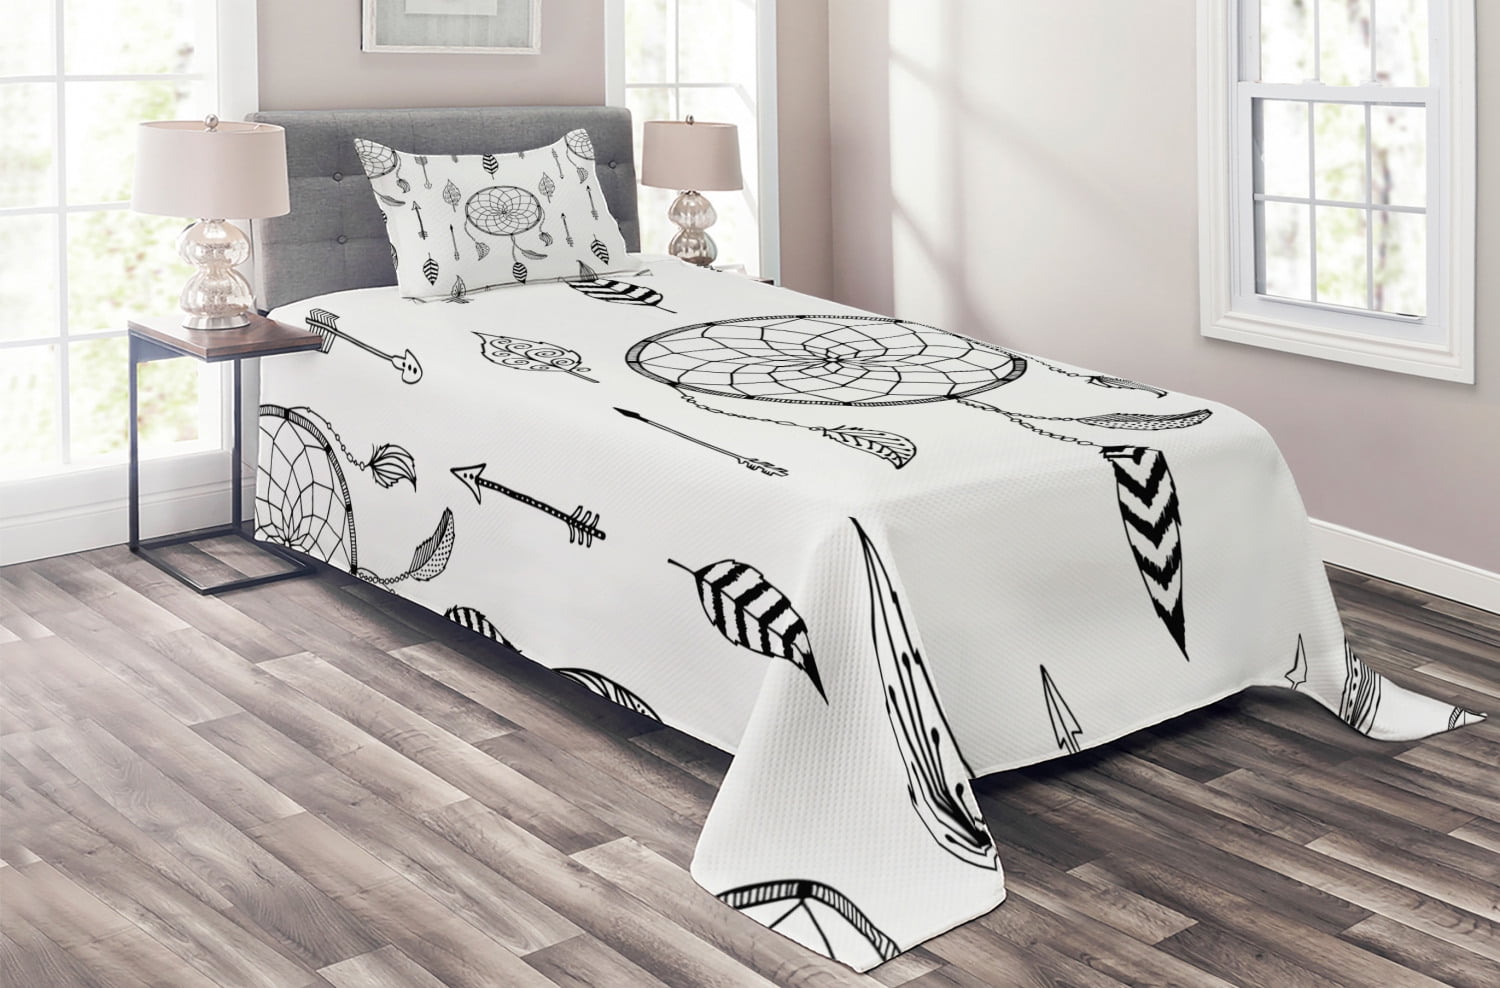 White and Black Indie Western Arrows Traditional Folk Culture Print King Size Ambesonne Arrow Duvet Cover Set Decorative 3 Piece Bedding Set with 2 Pillow Shams